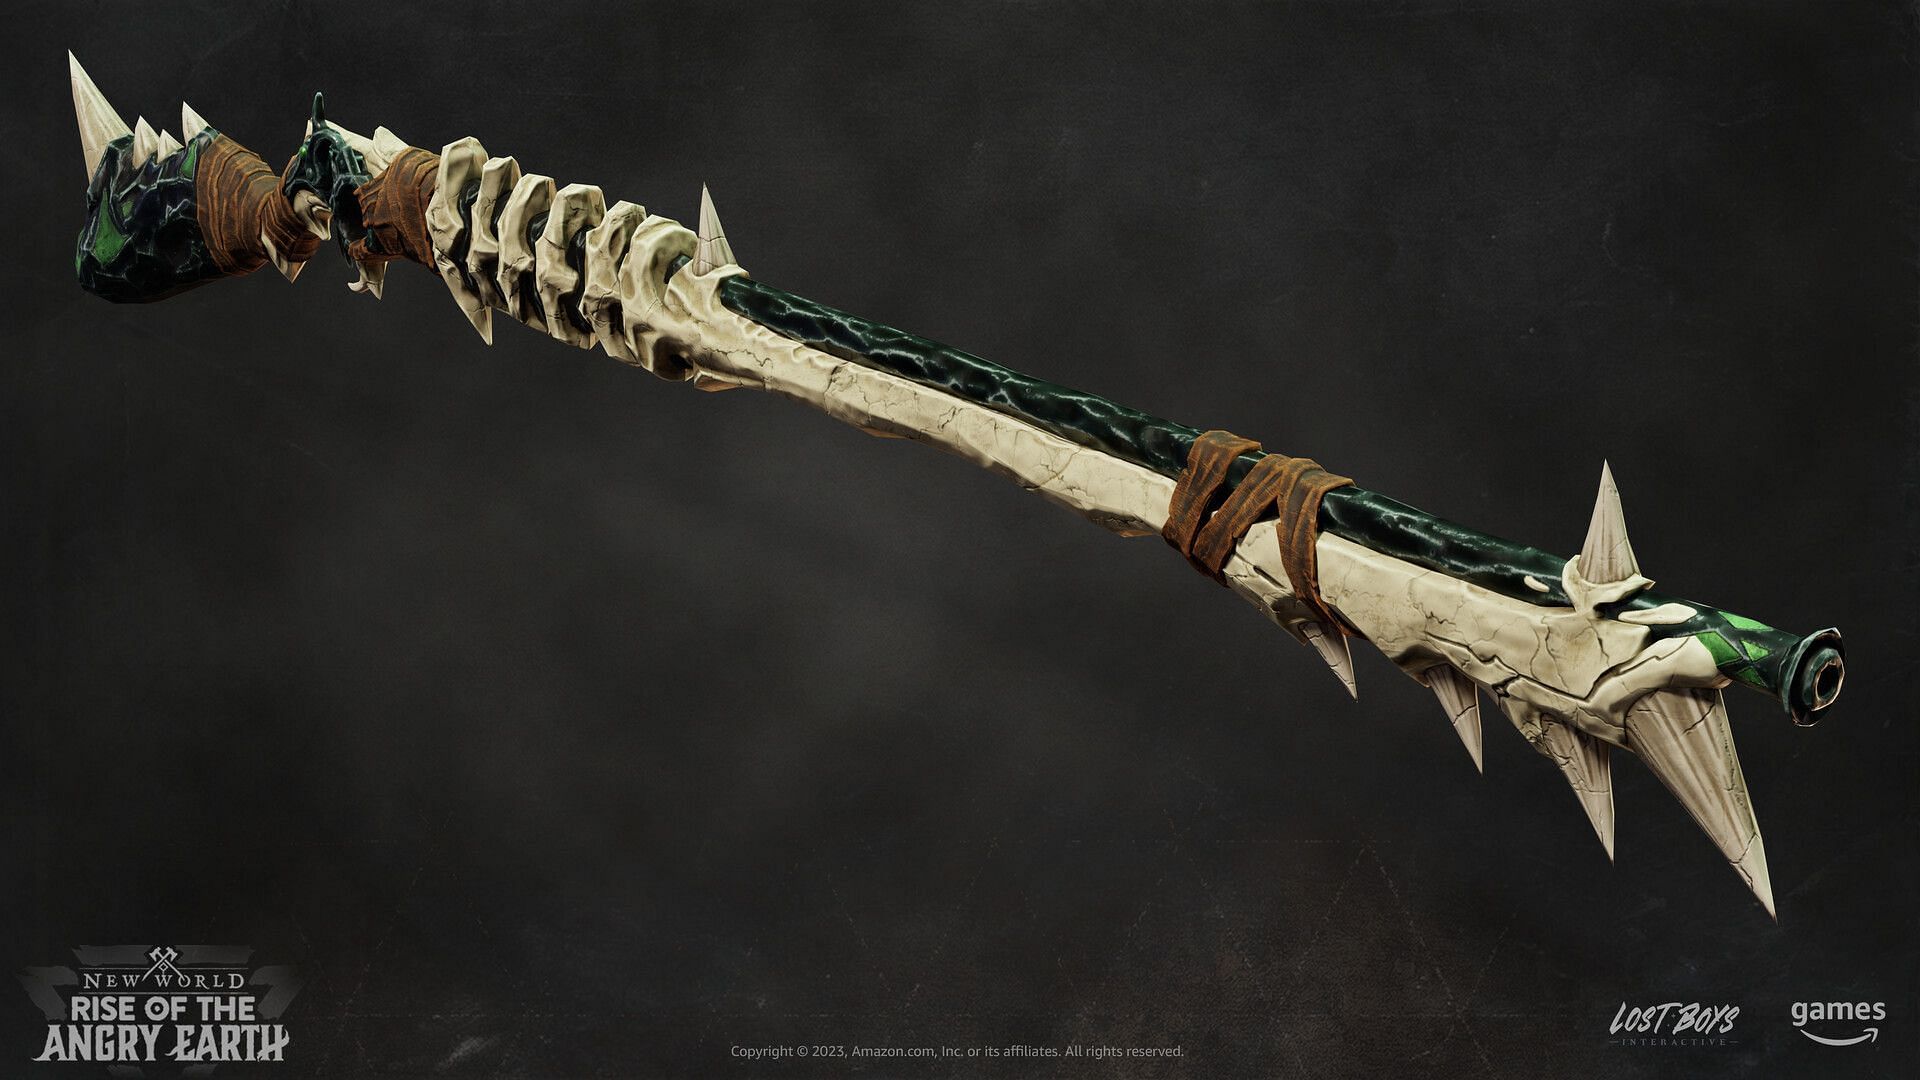 Musket weapon in New World Rise of the Angry Earth (Image via Amazon Games)